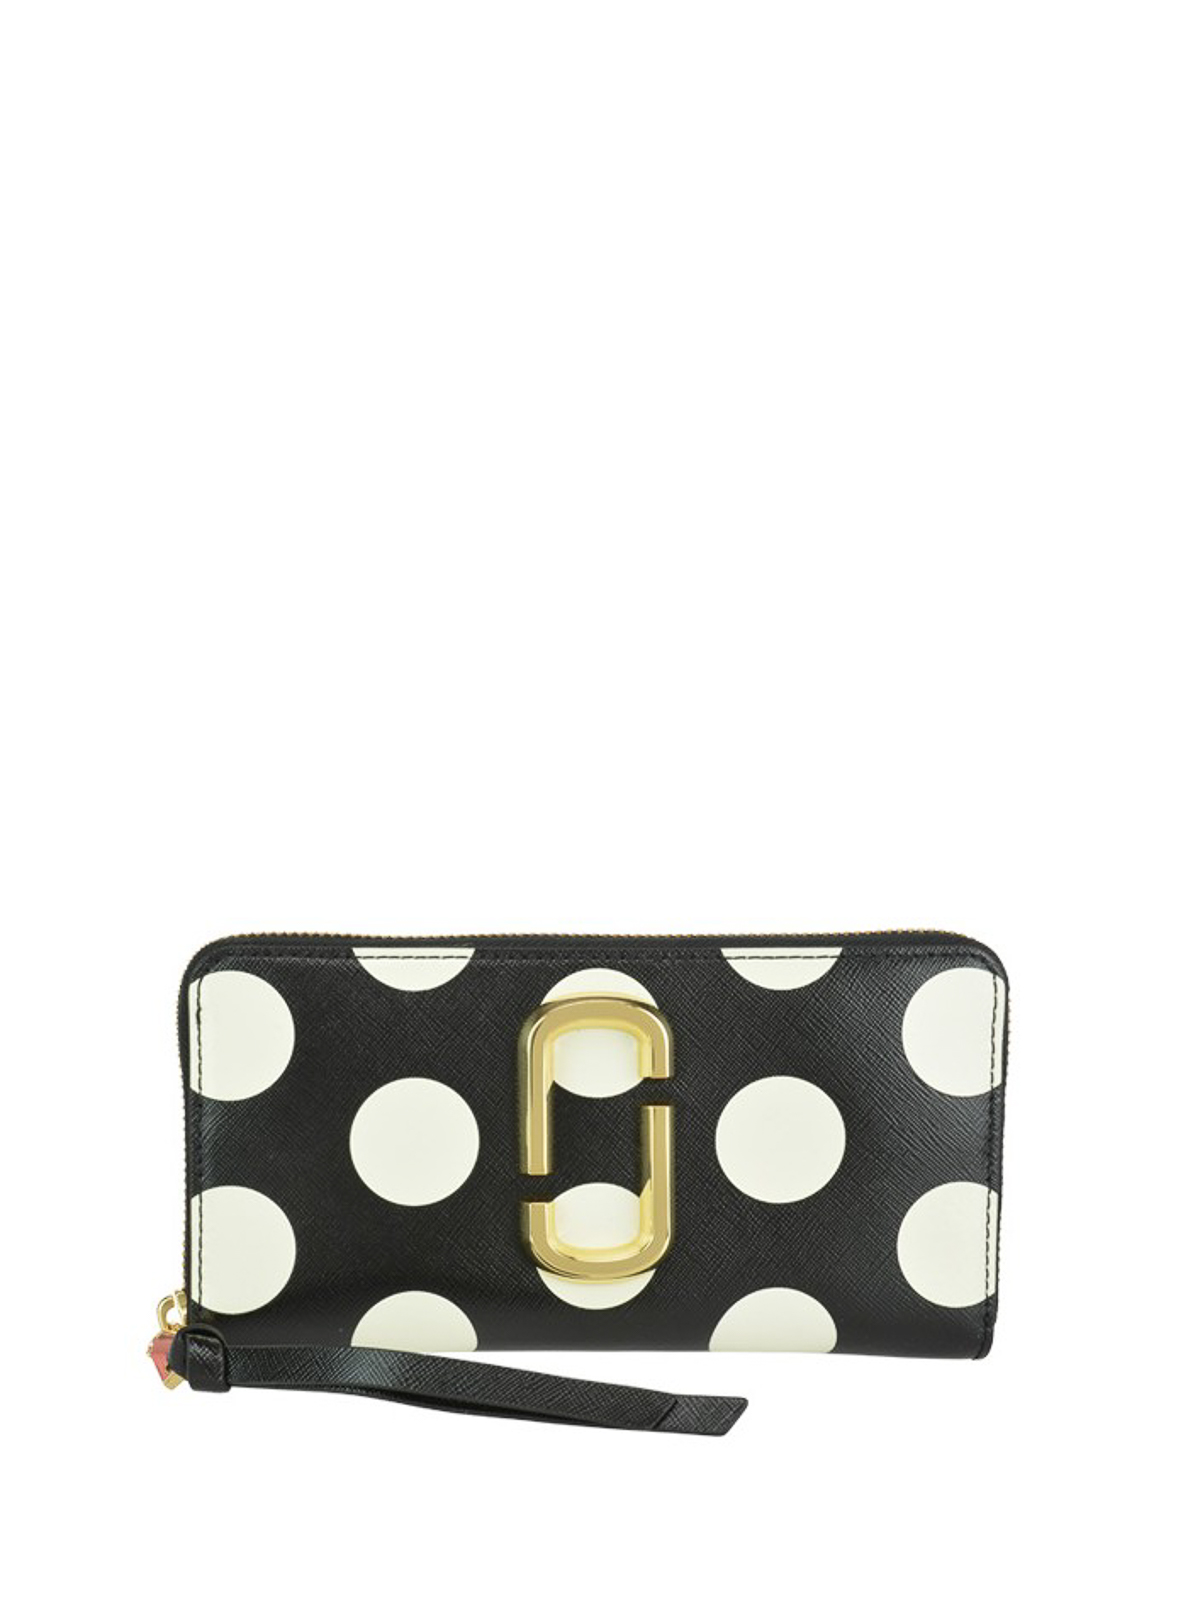 Marc Jacobs The Dot Snapshot Bag in Pink